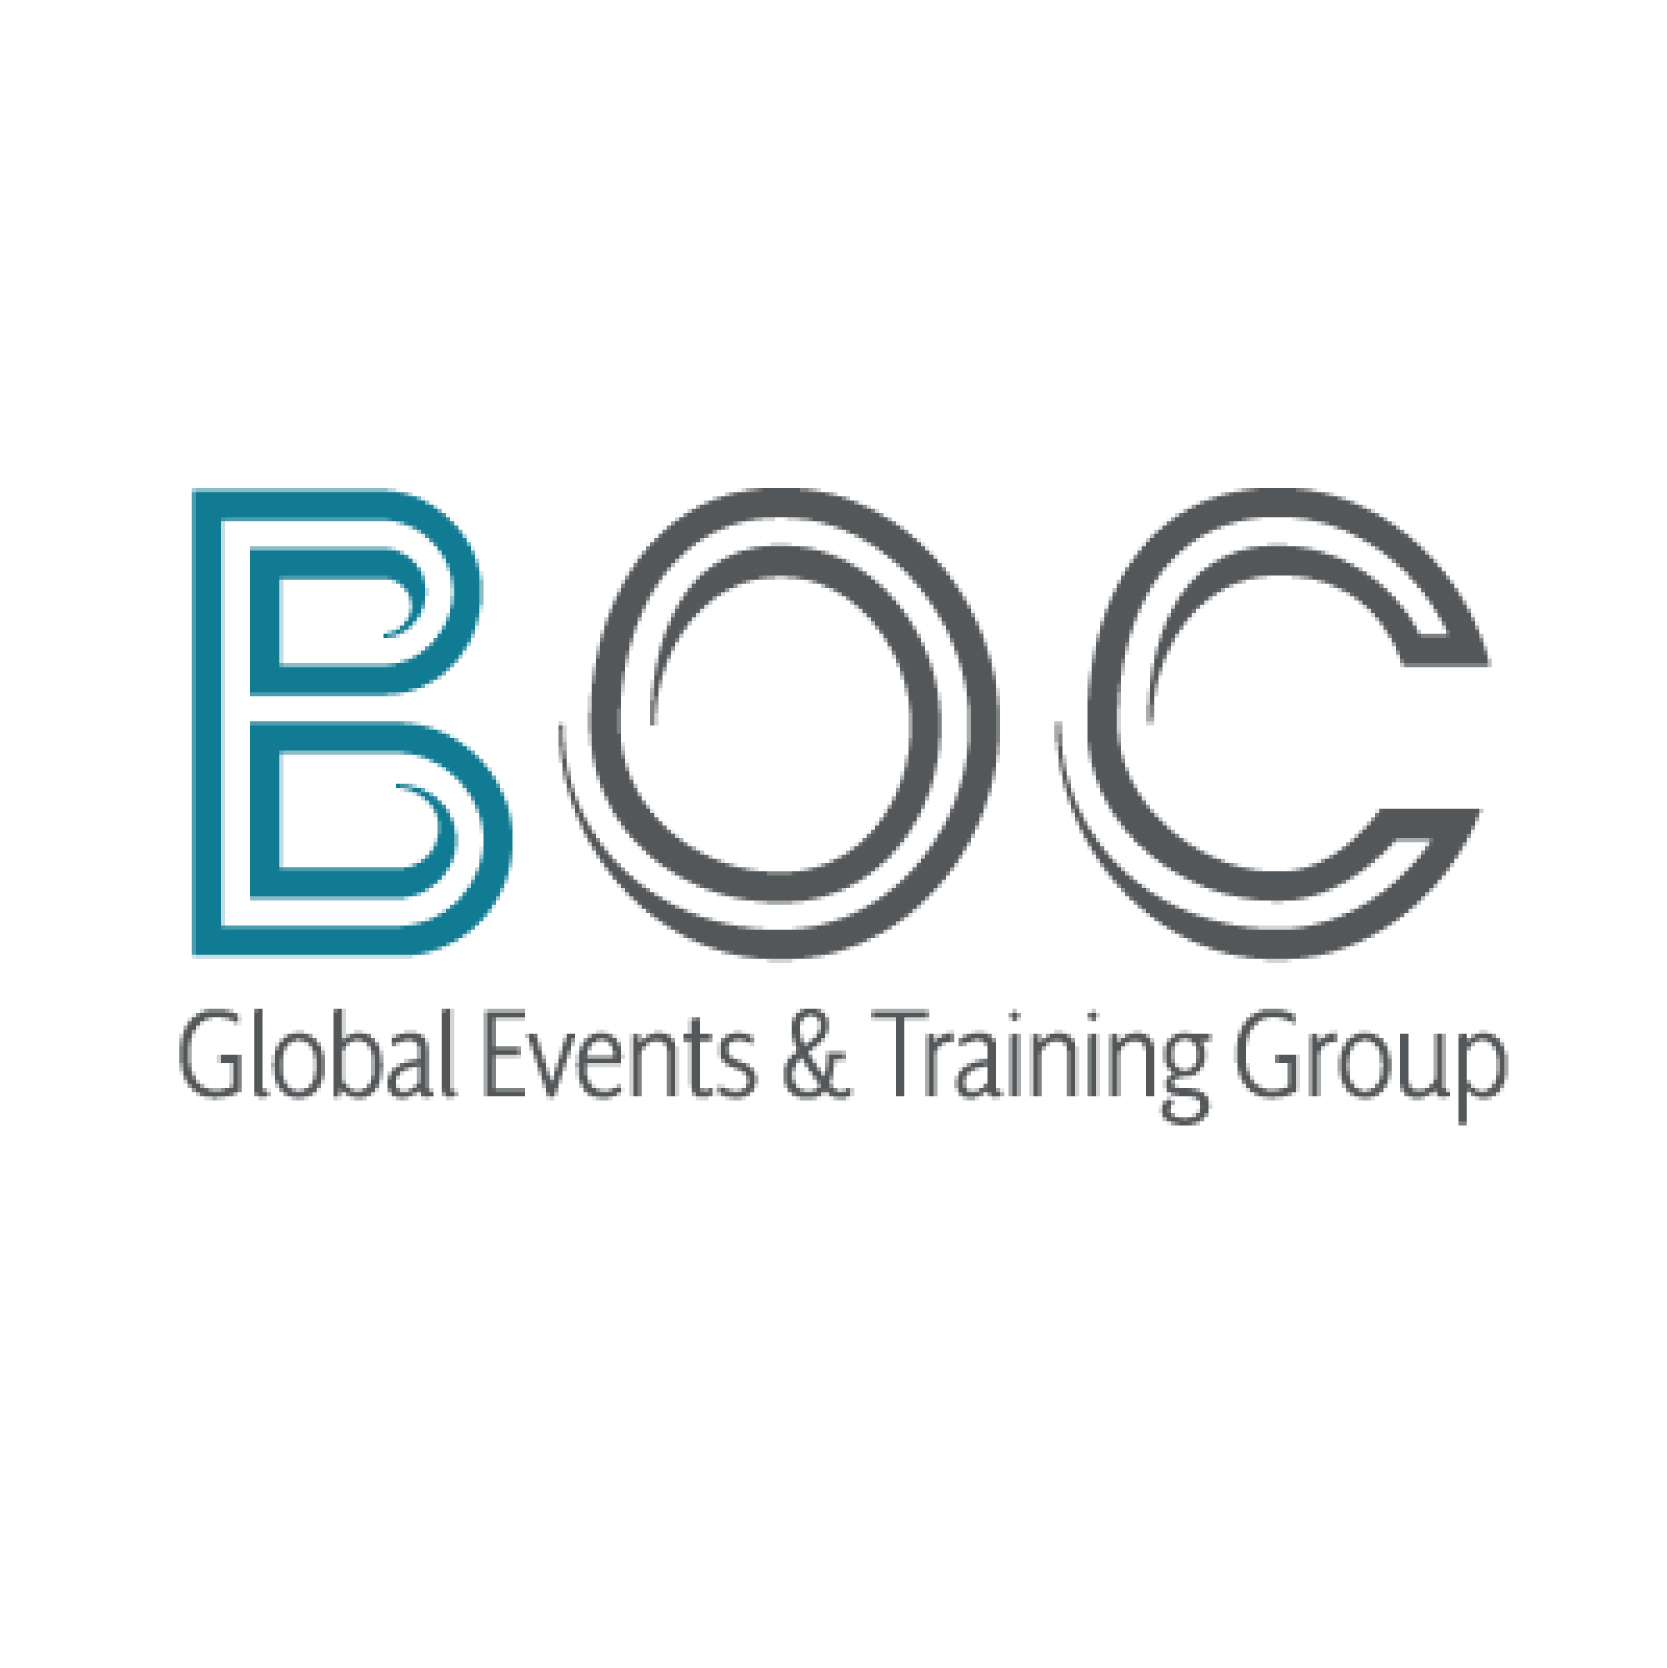 BOC Global Events and Training Group